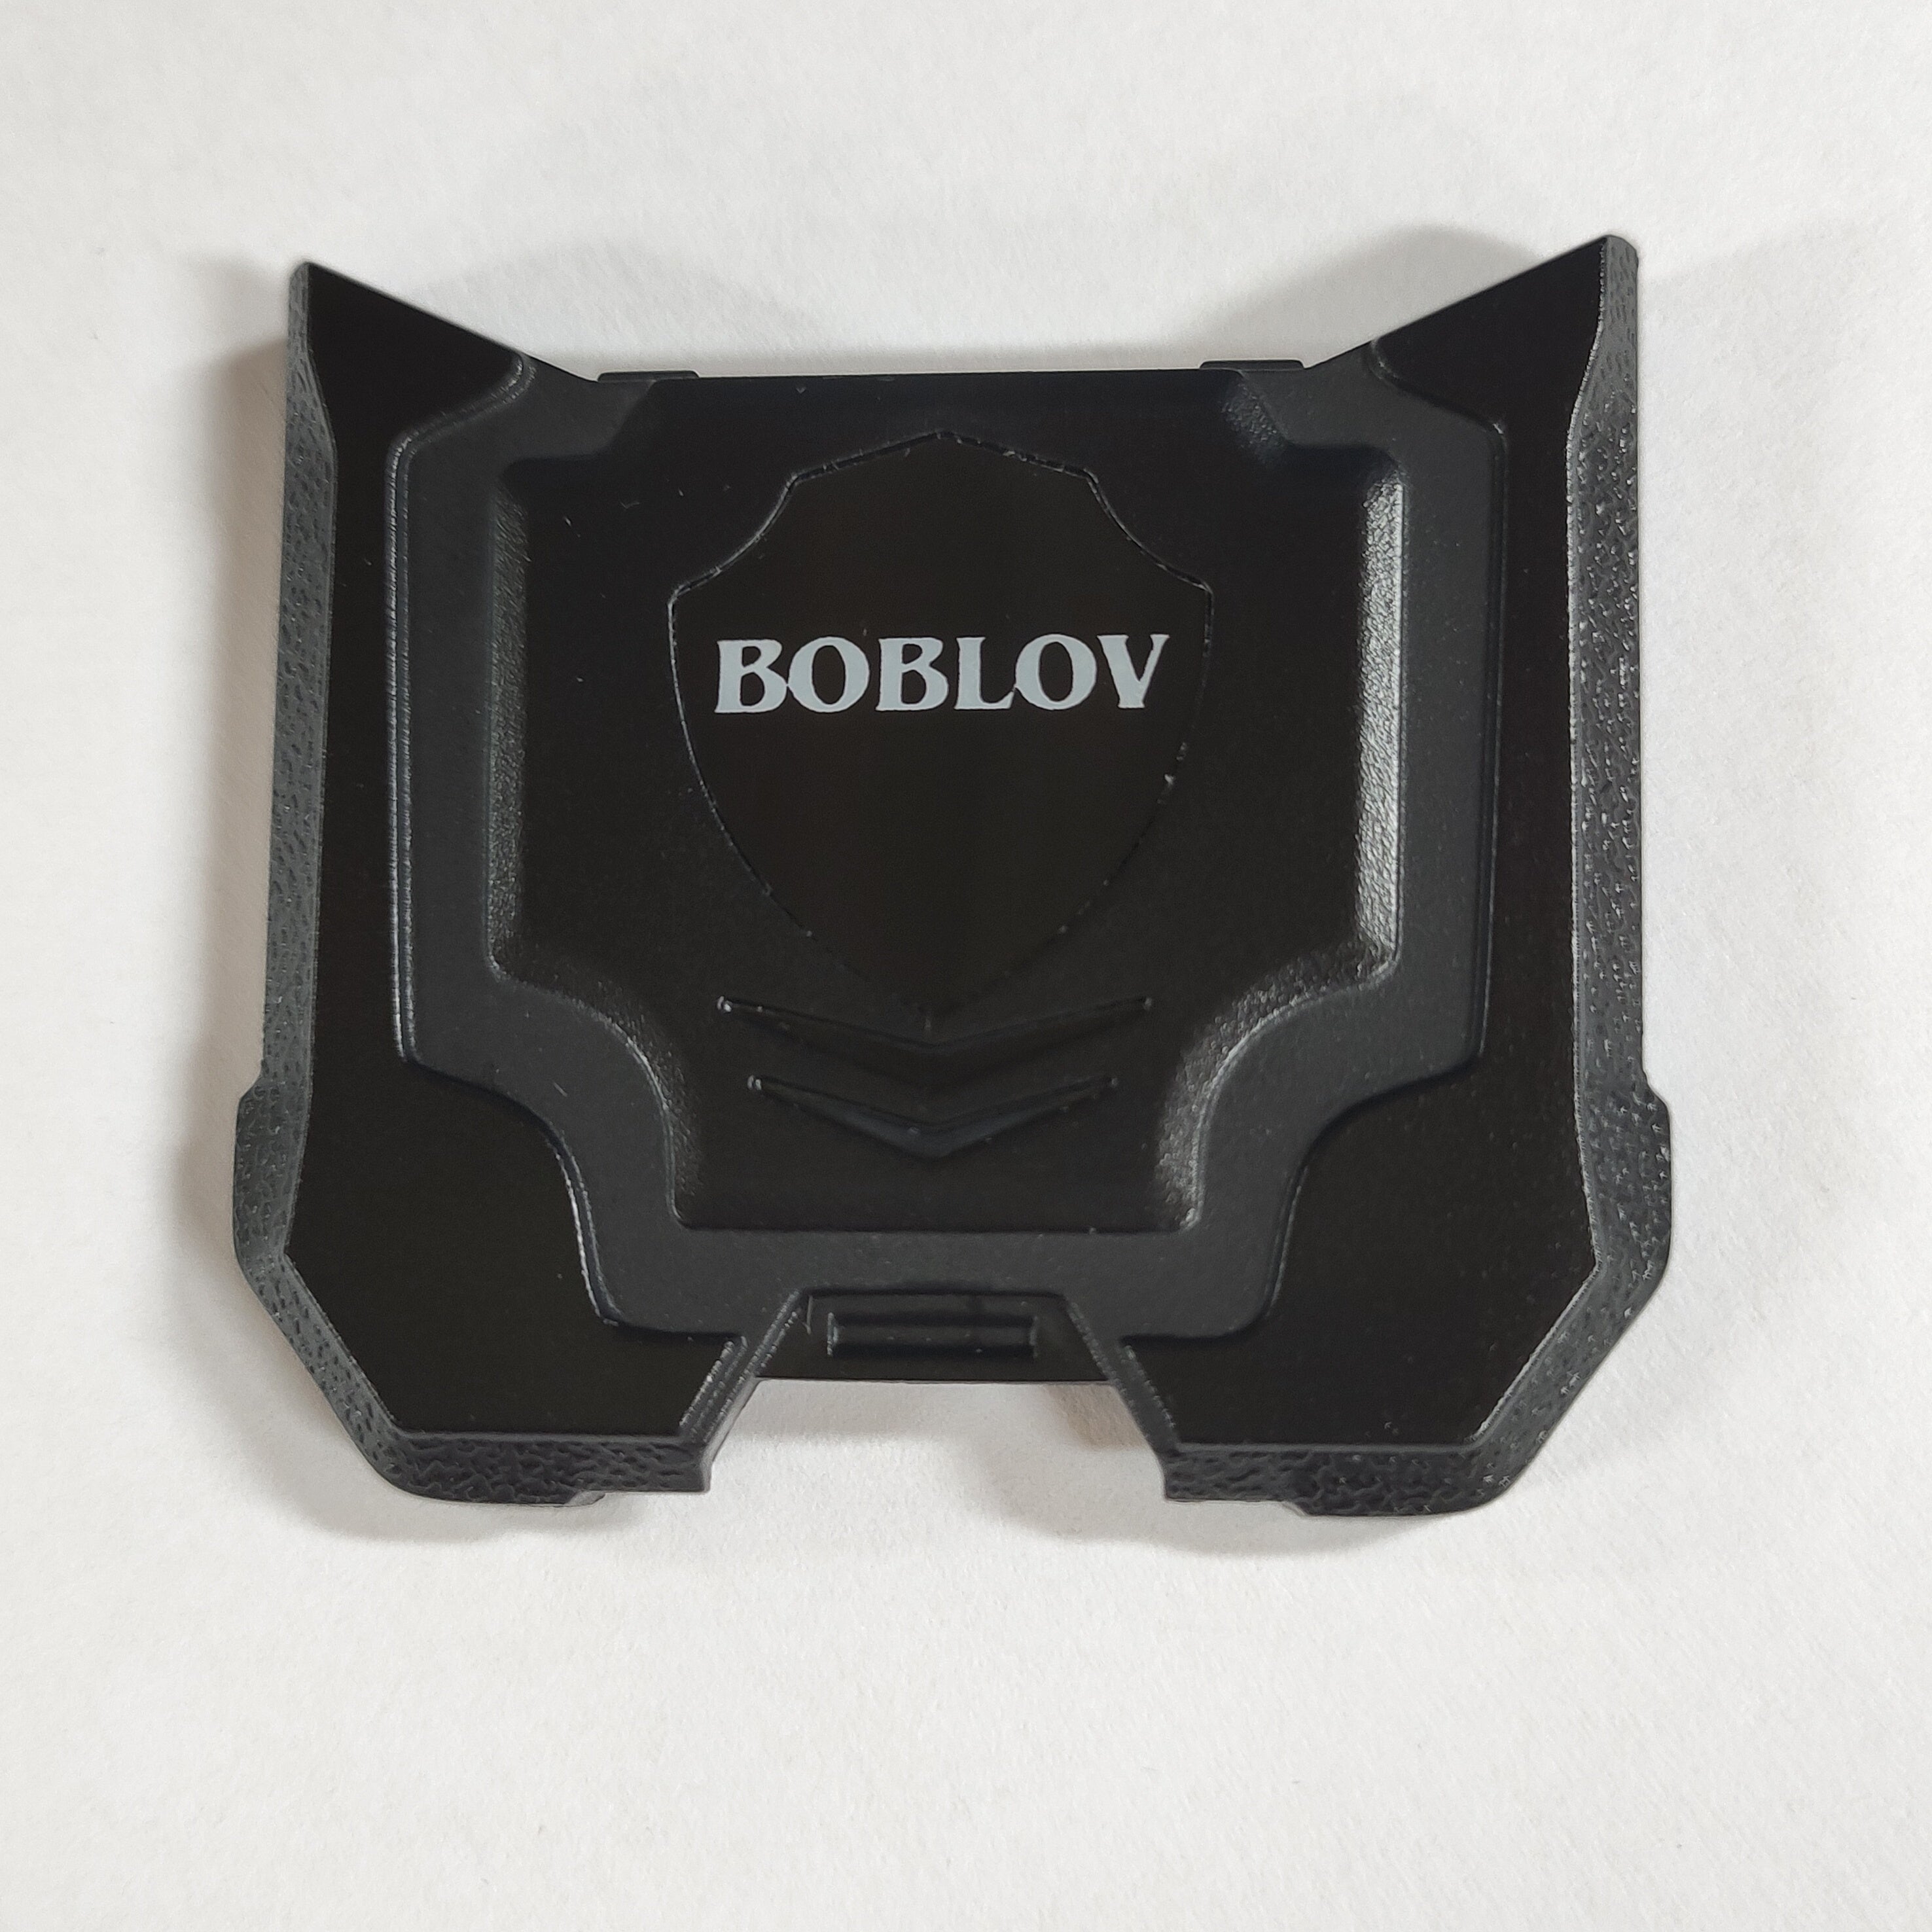 BOBLOV T5 body camera replacement battery cover0